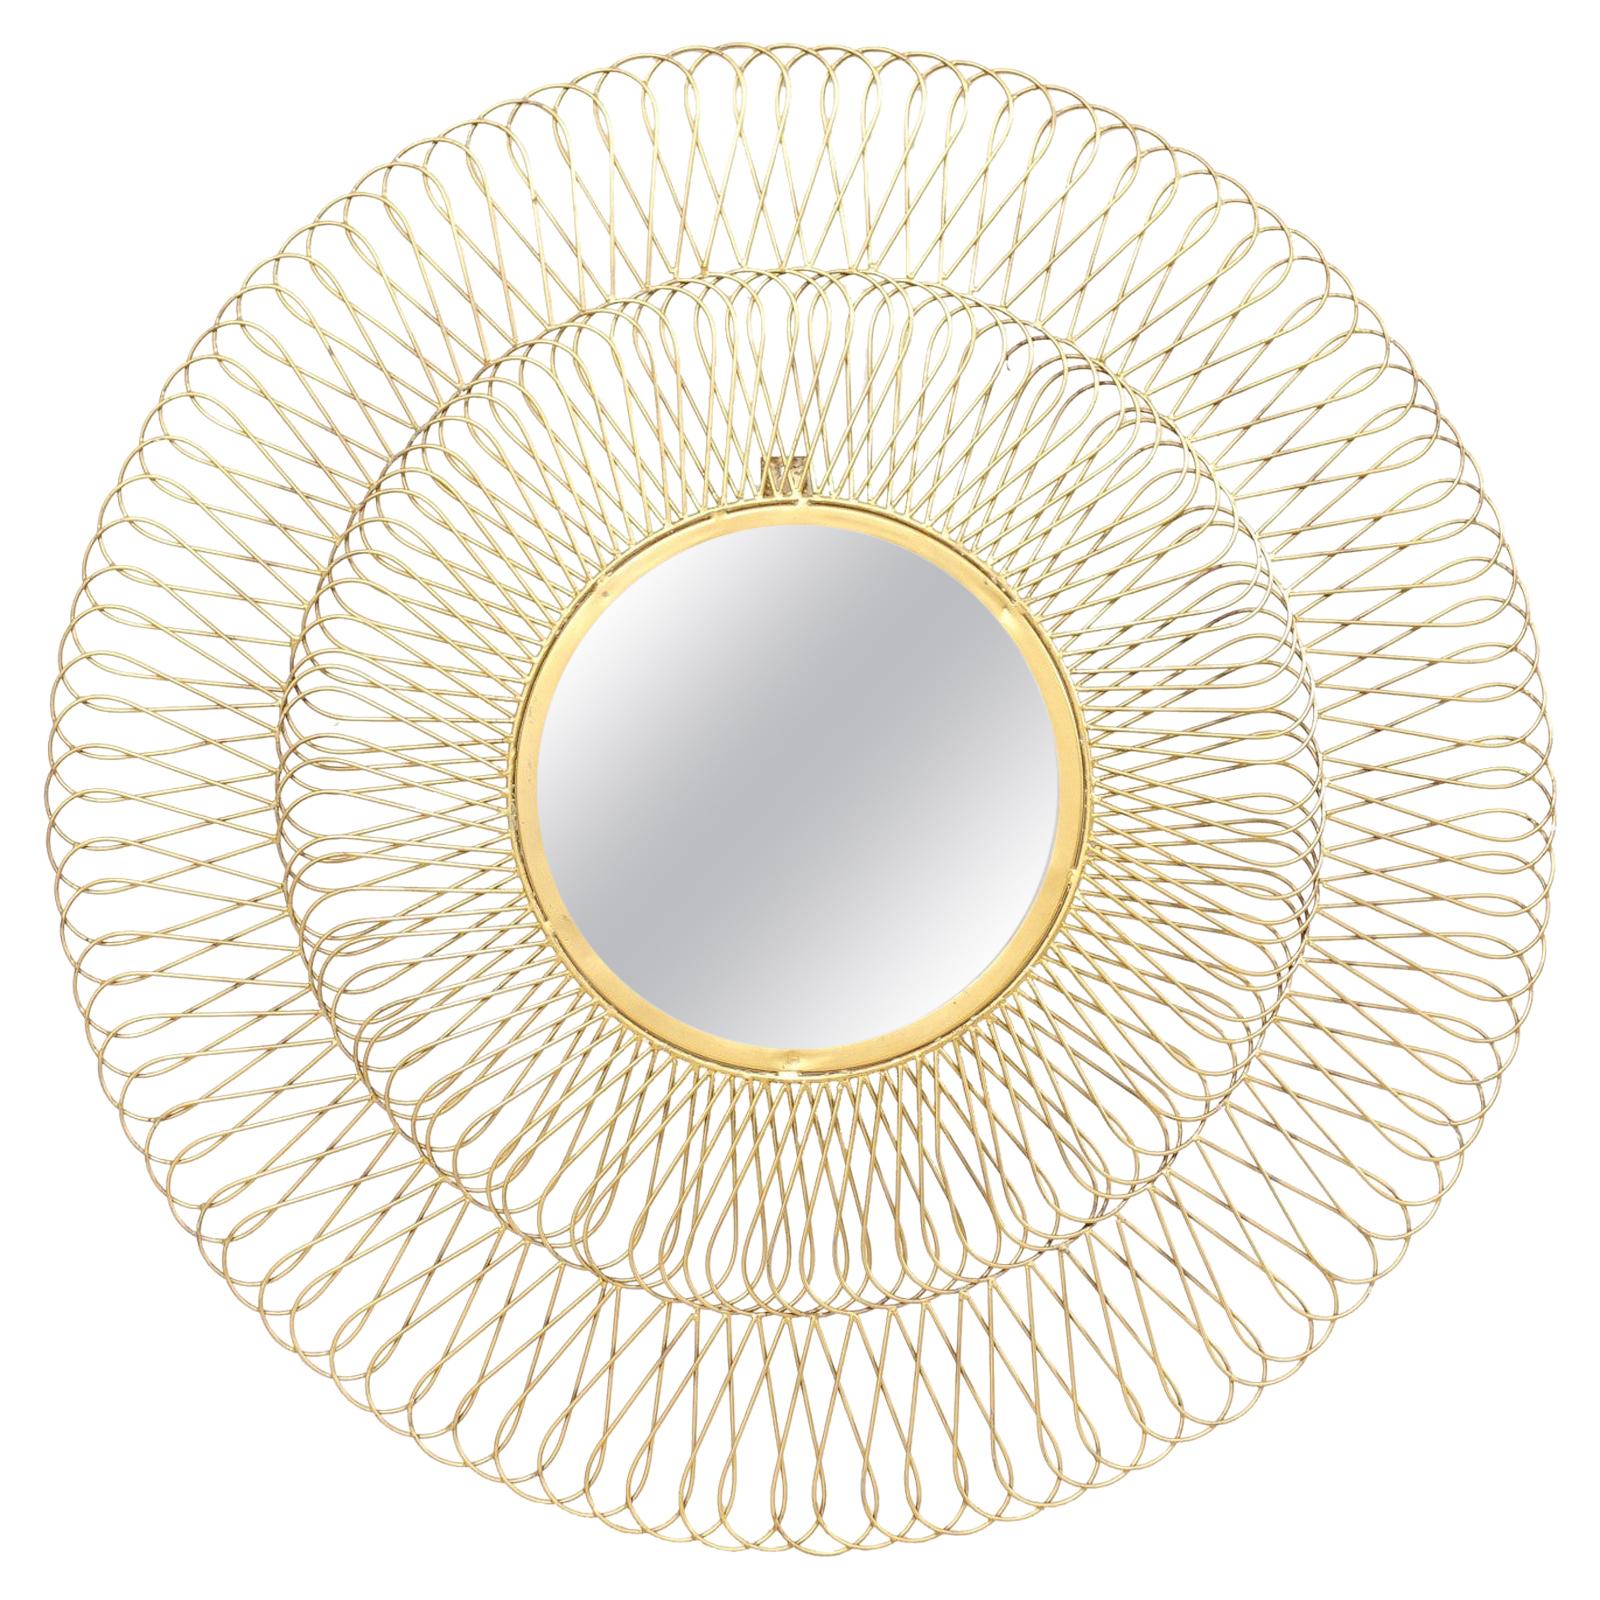 Spanish Round-Shaped Brass Mirror with Open Intertwining Loop Surround